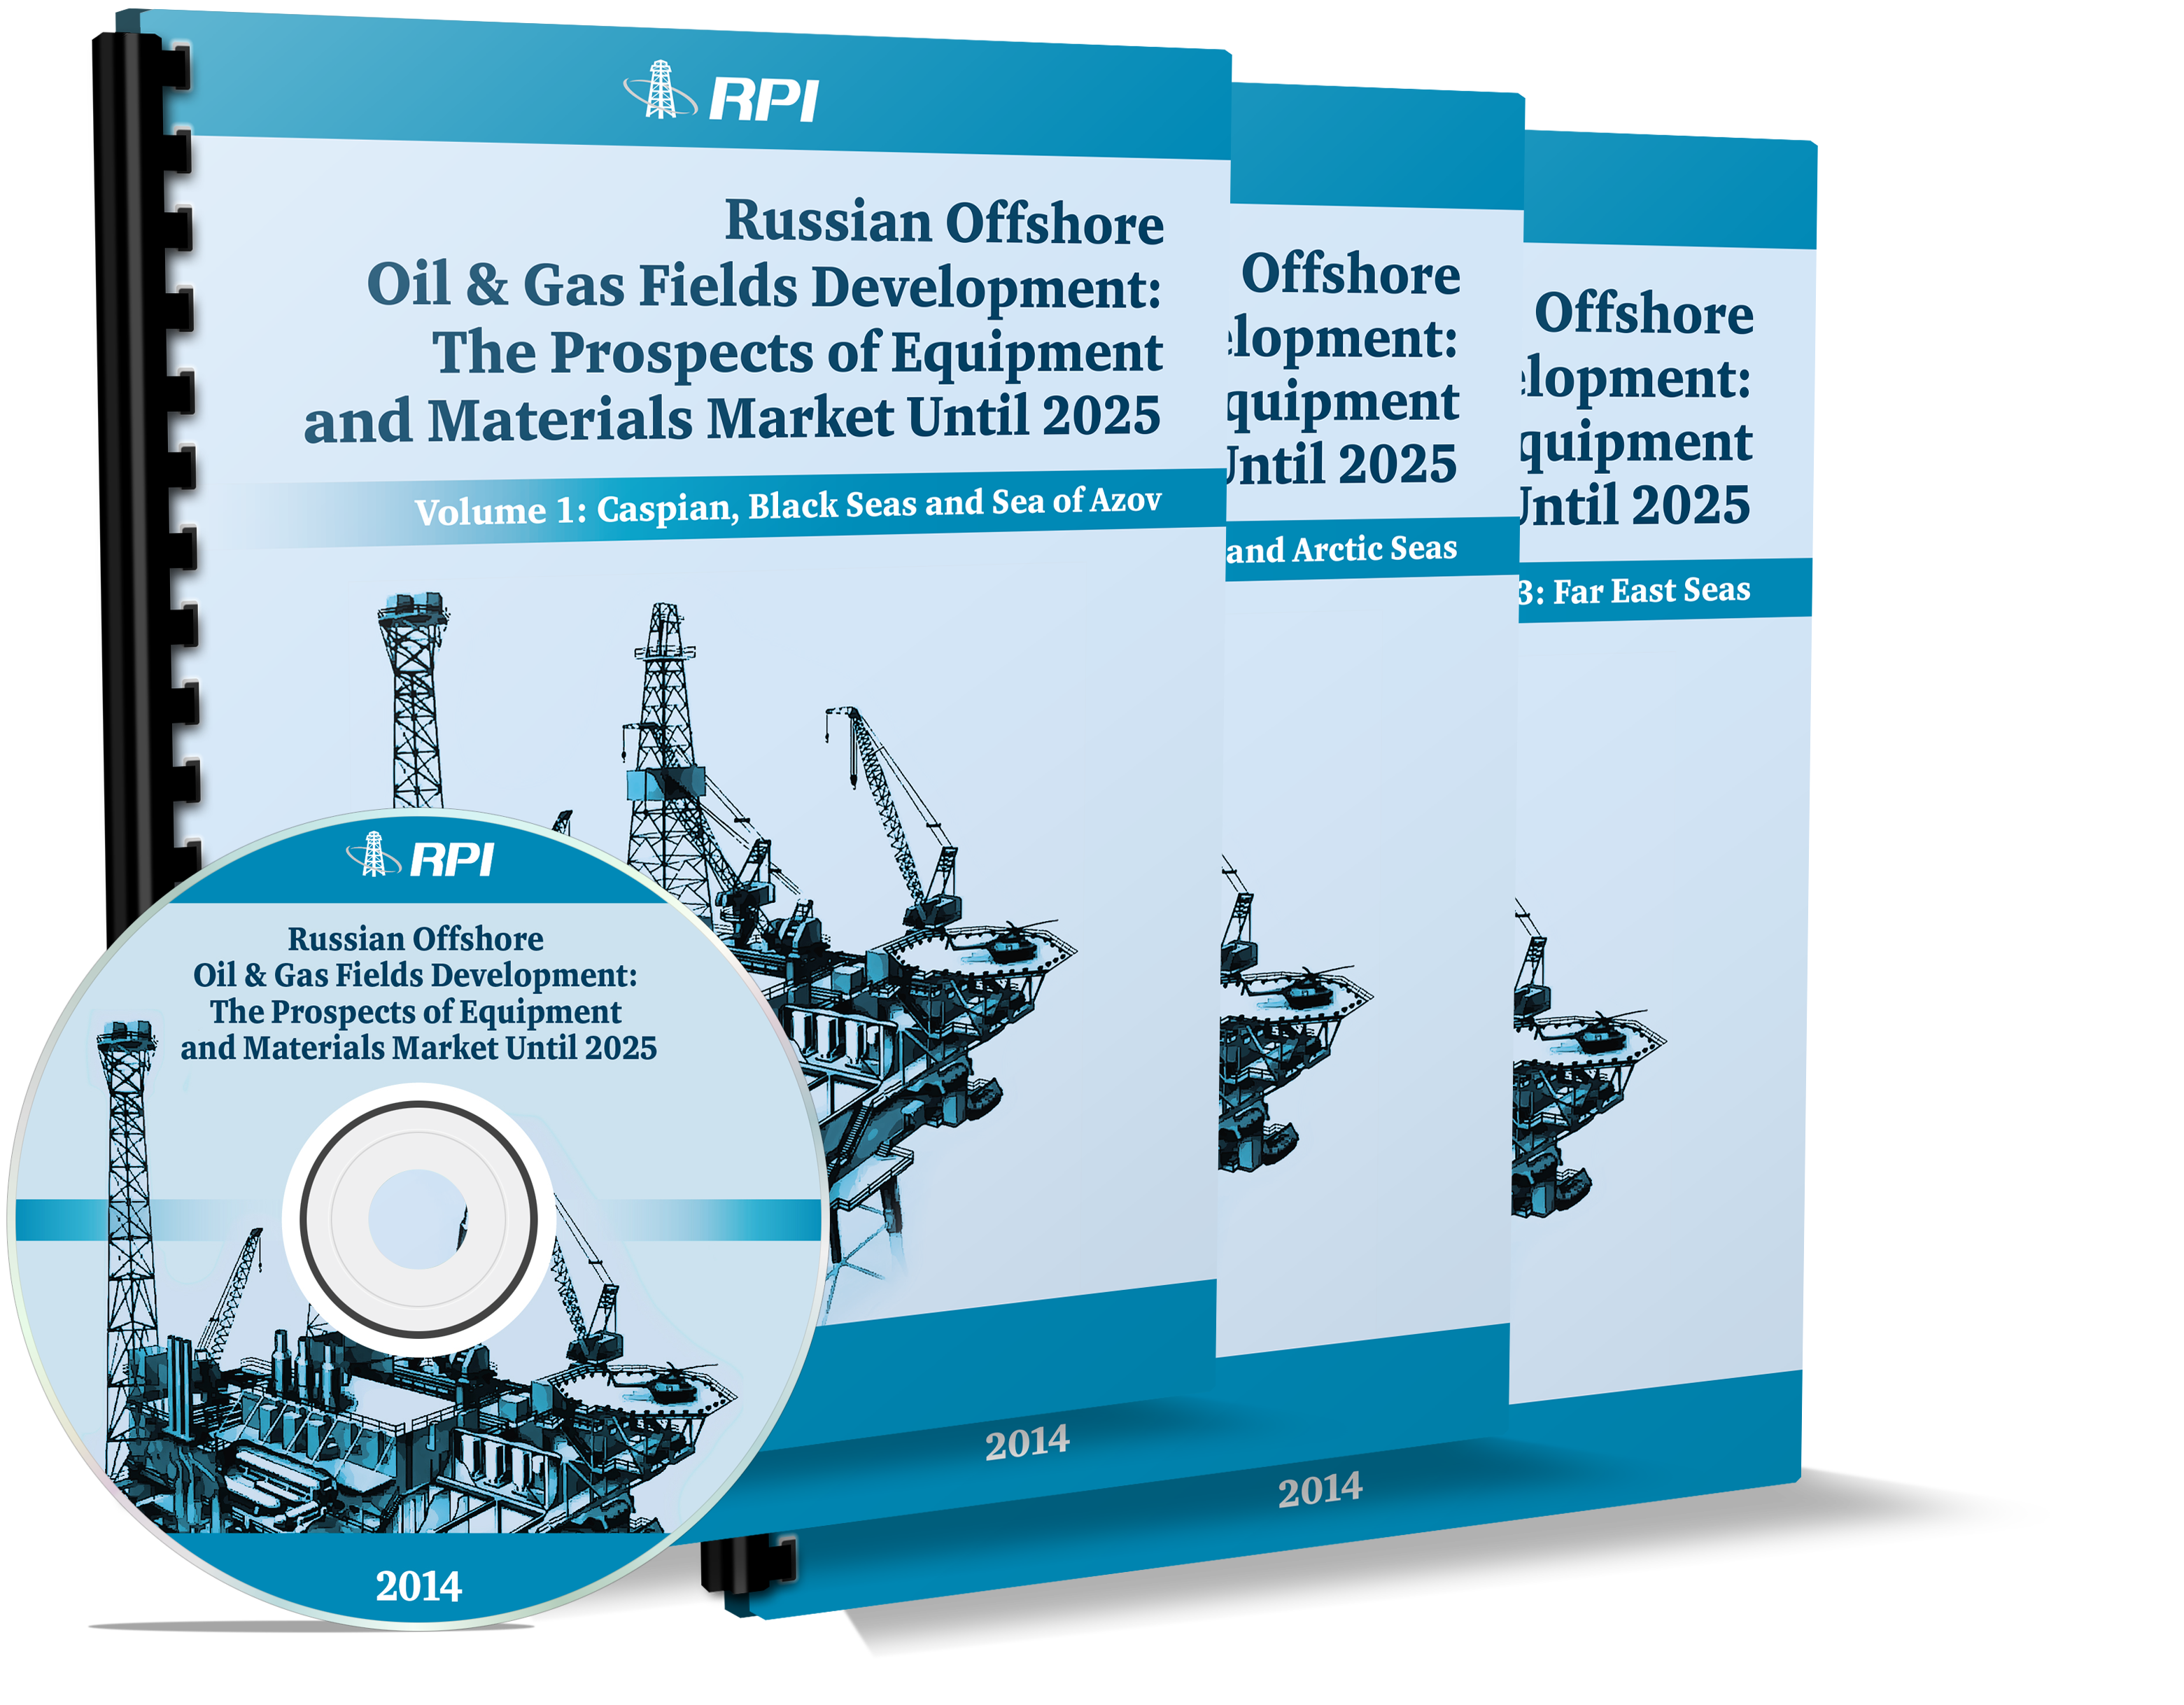 Russian Offshore Oil & Gas Fields Development: The Prospects of Equipment and Materials Market Until 2025